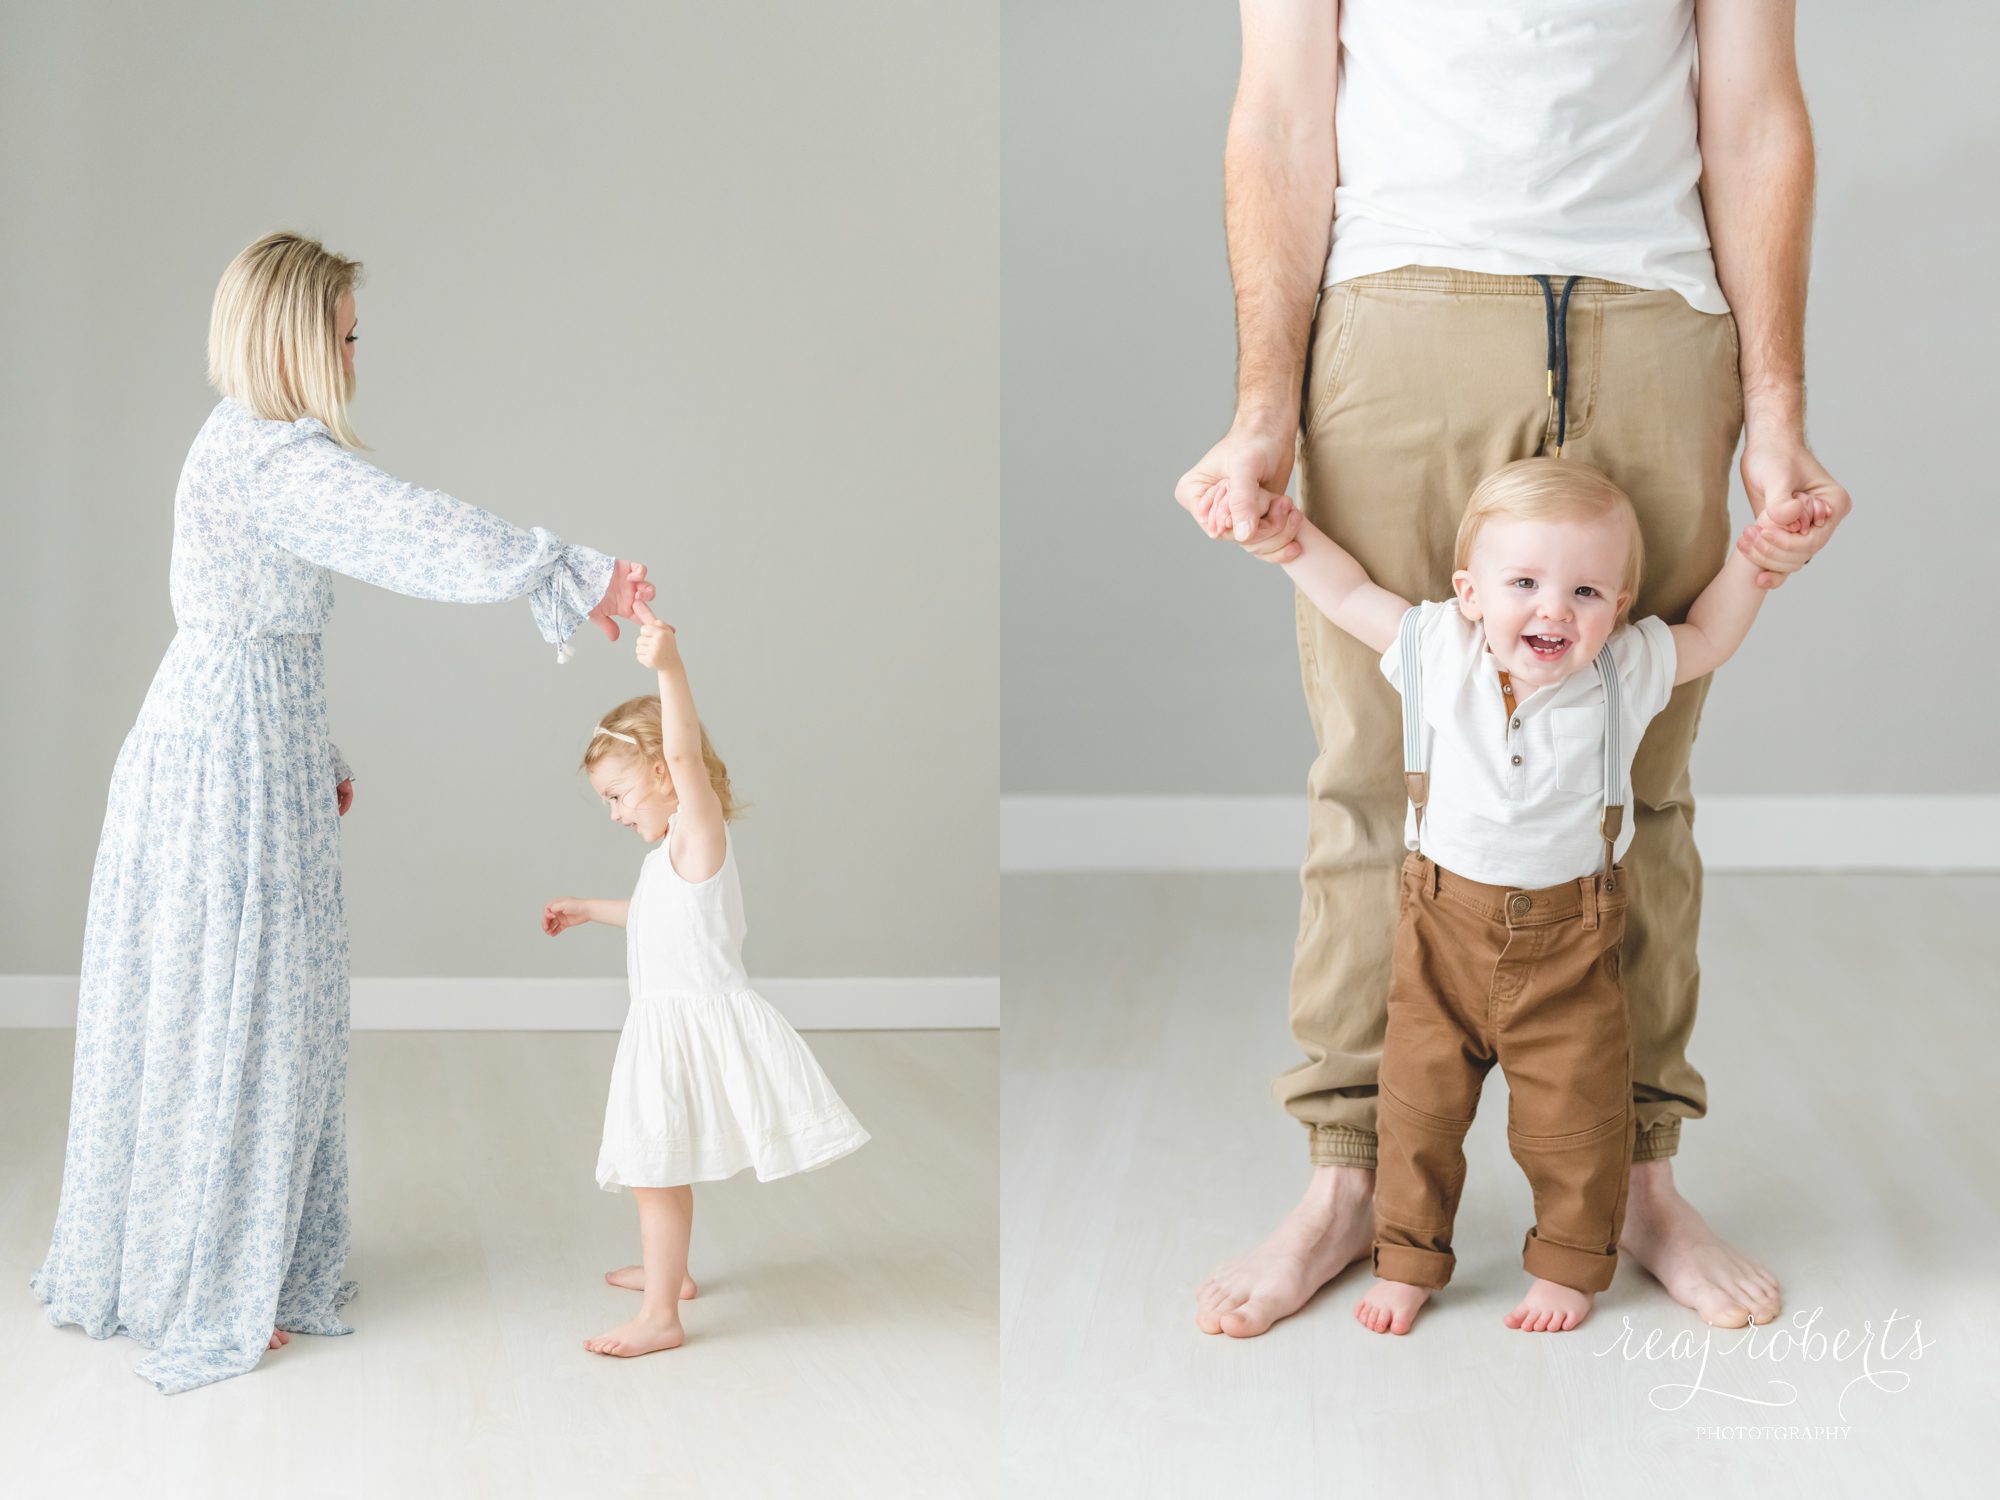 little girl dancing twirling with mom | baby boy walking with dad | Reaj Roberts Photography